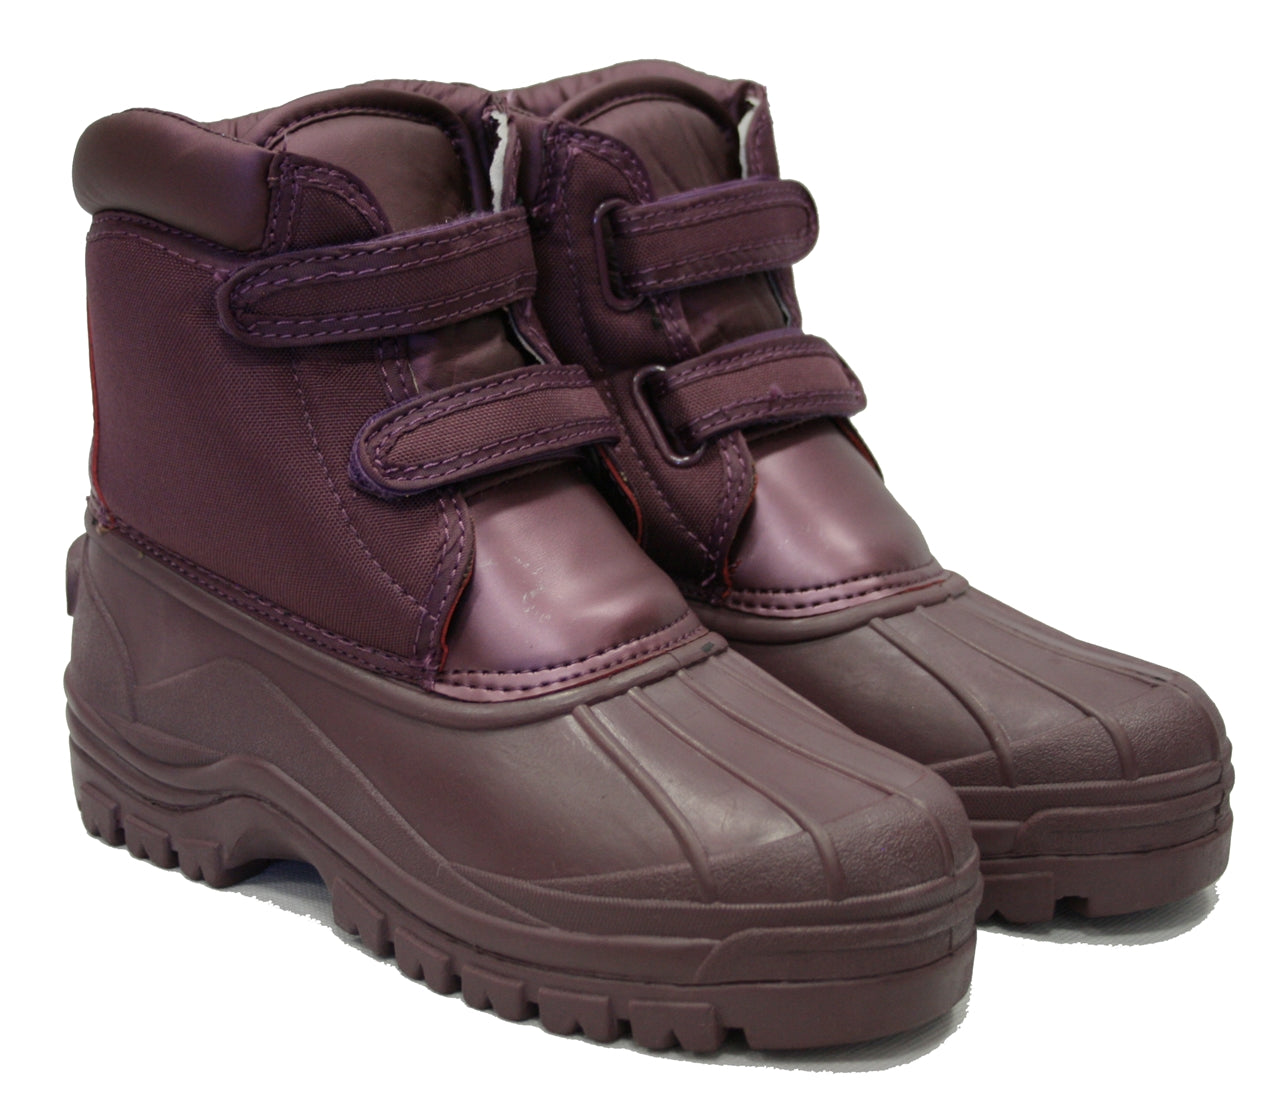 Town & Country Charnwood Gardening Boots